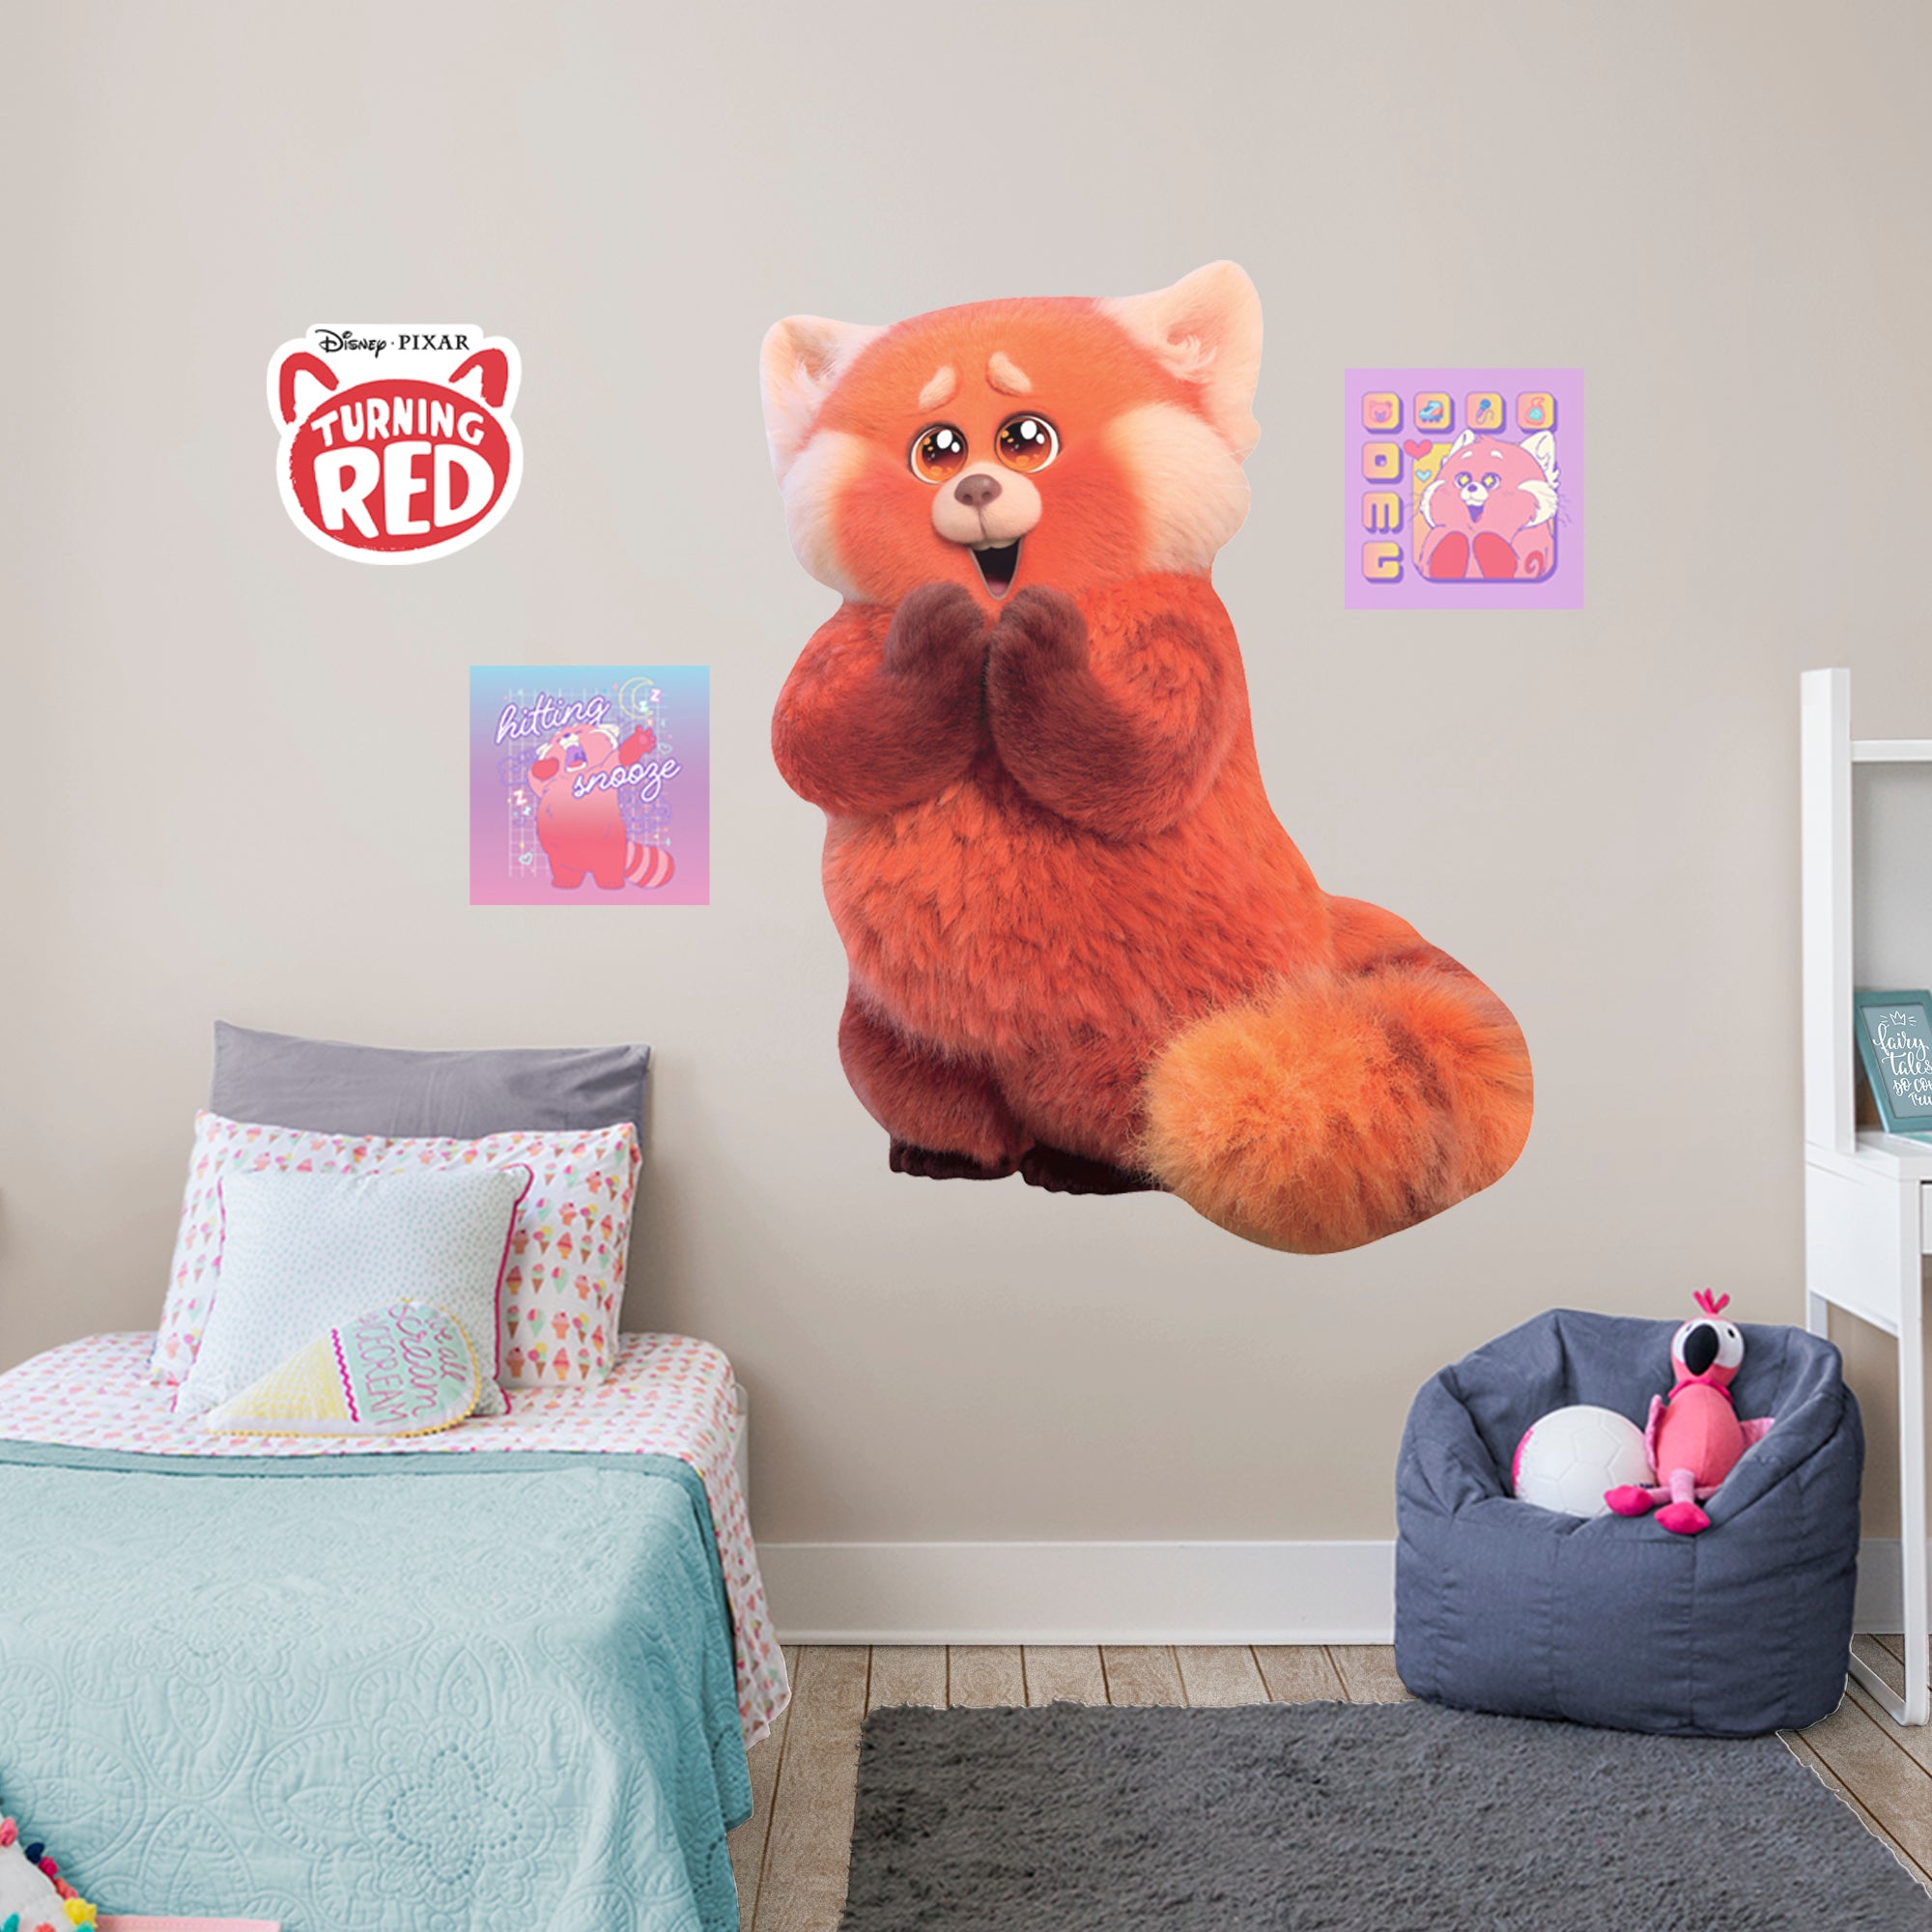 Turning Red: Red Panda Mei RealBig - Officially Licensed Disney